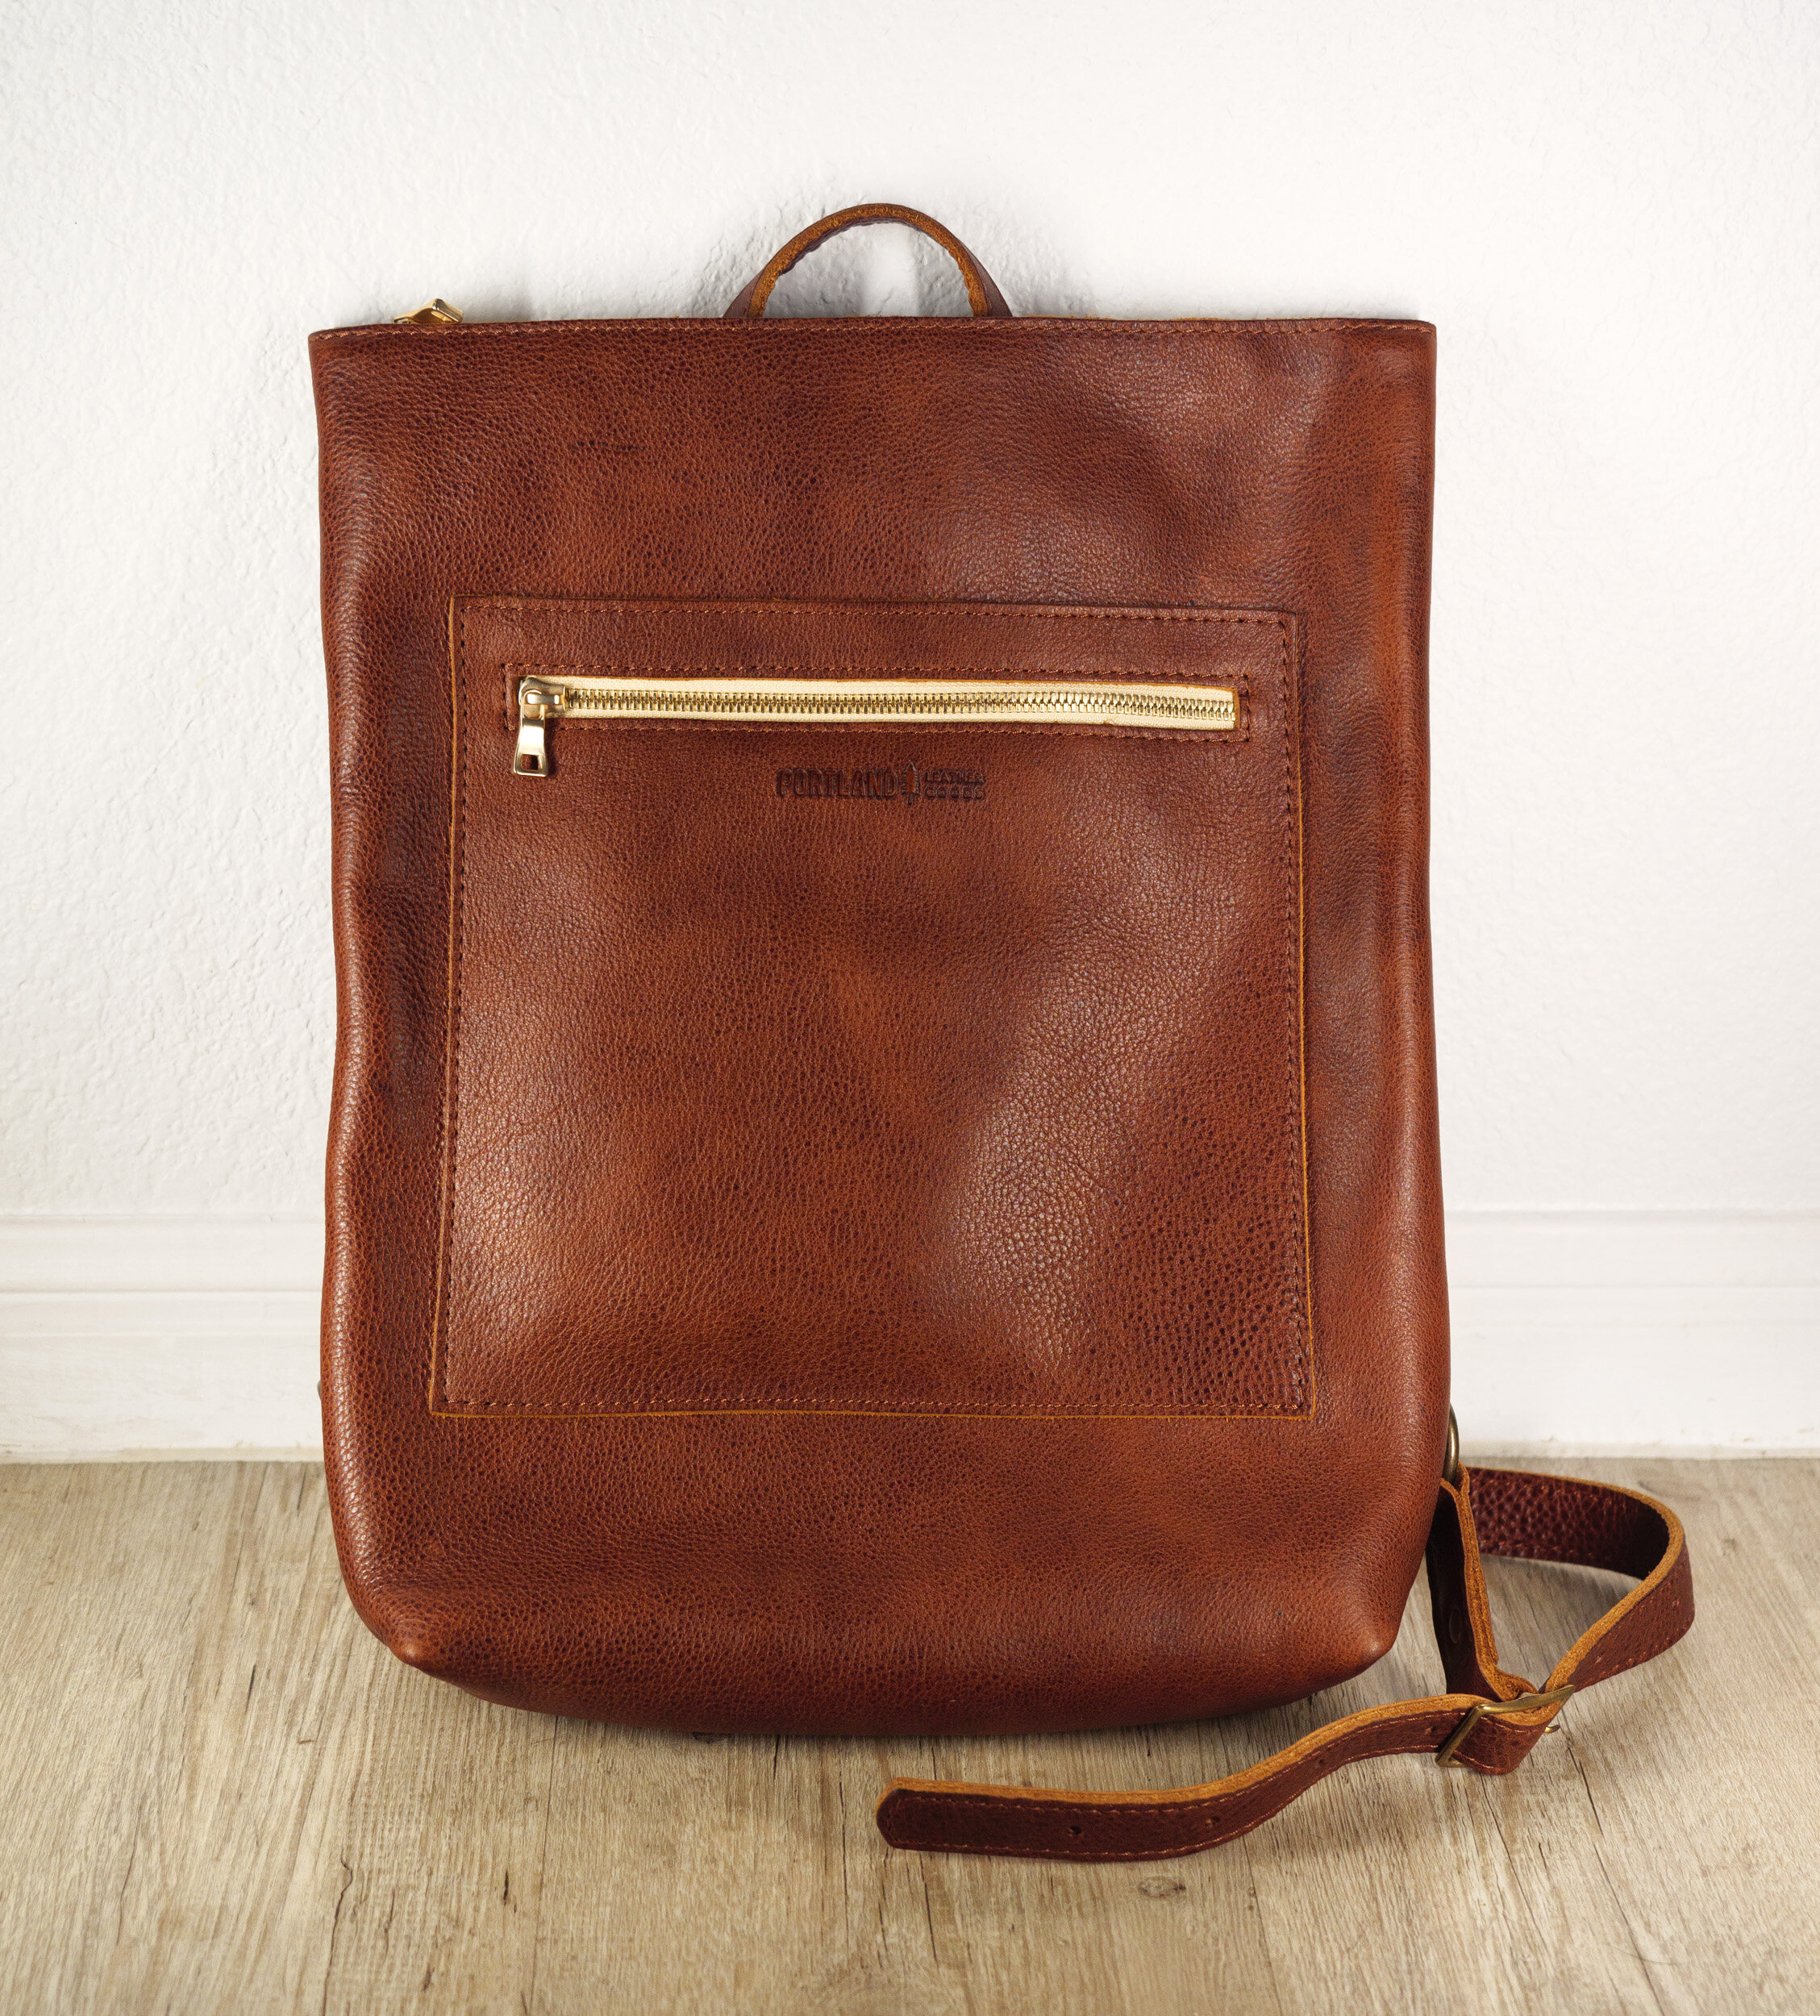 Beautiful backpack from Portland Leather Goods